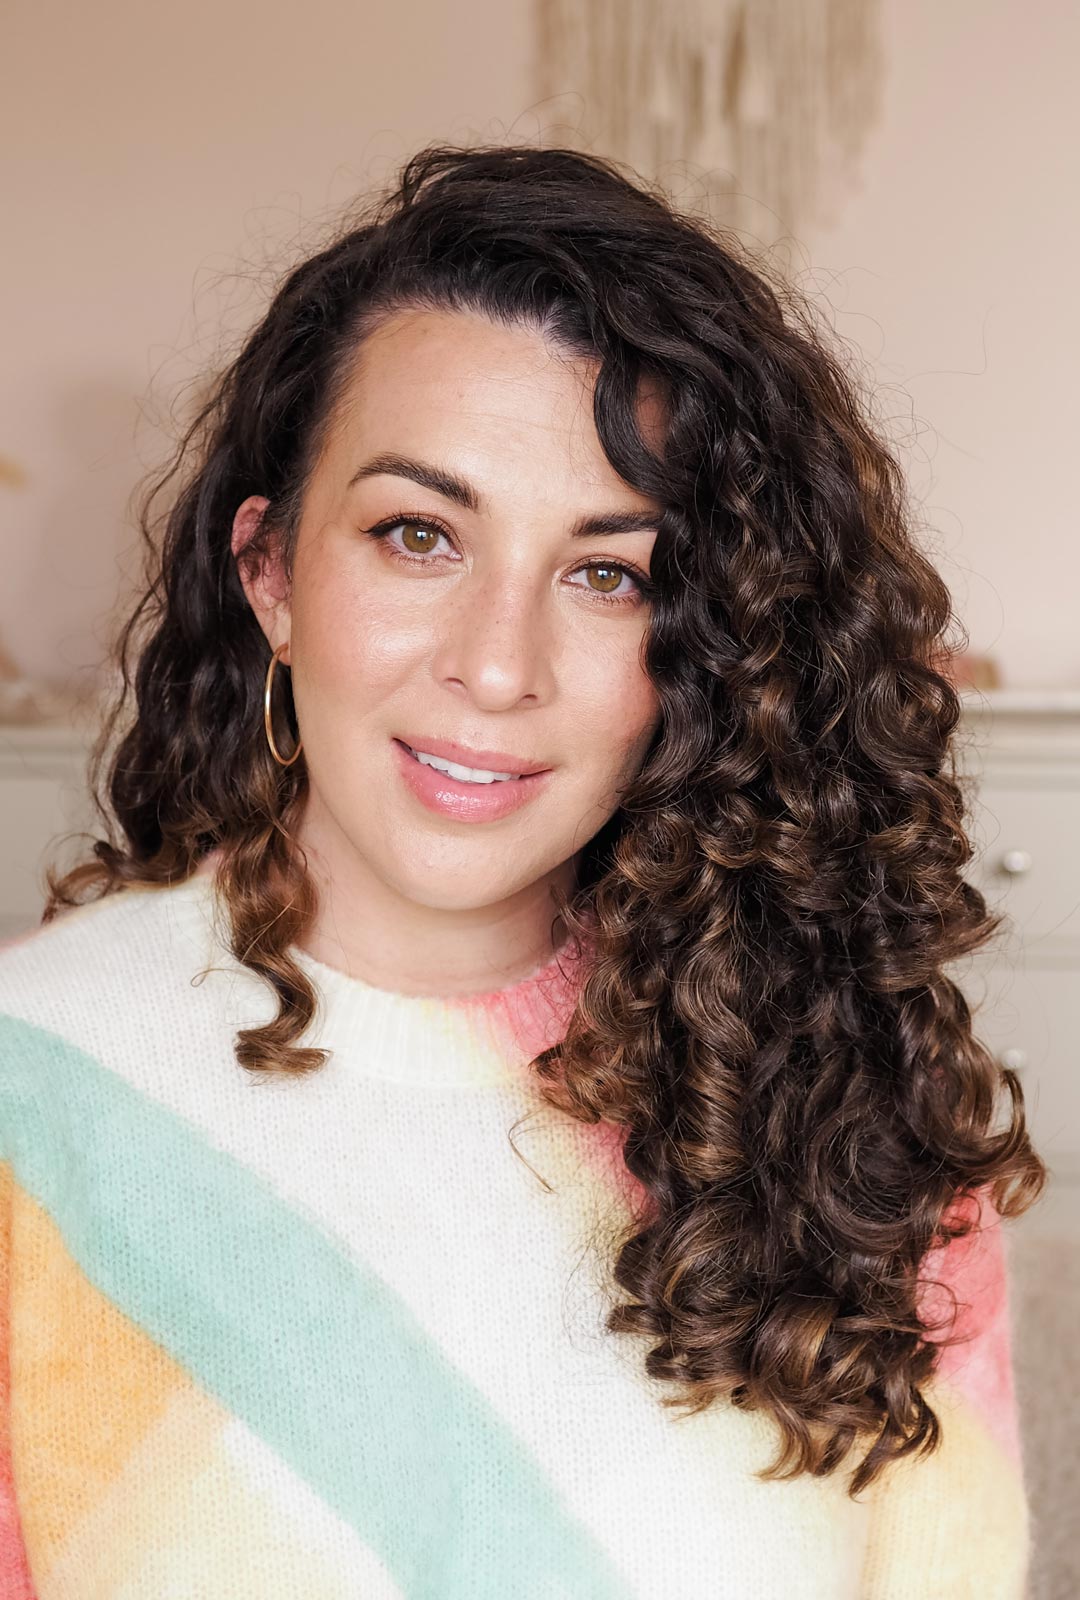 How to build a fragrance free curly hair routine